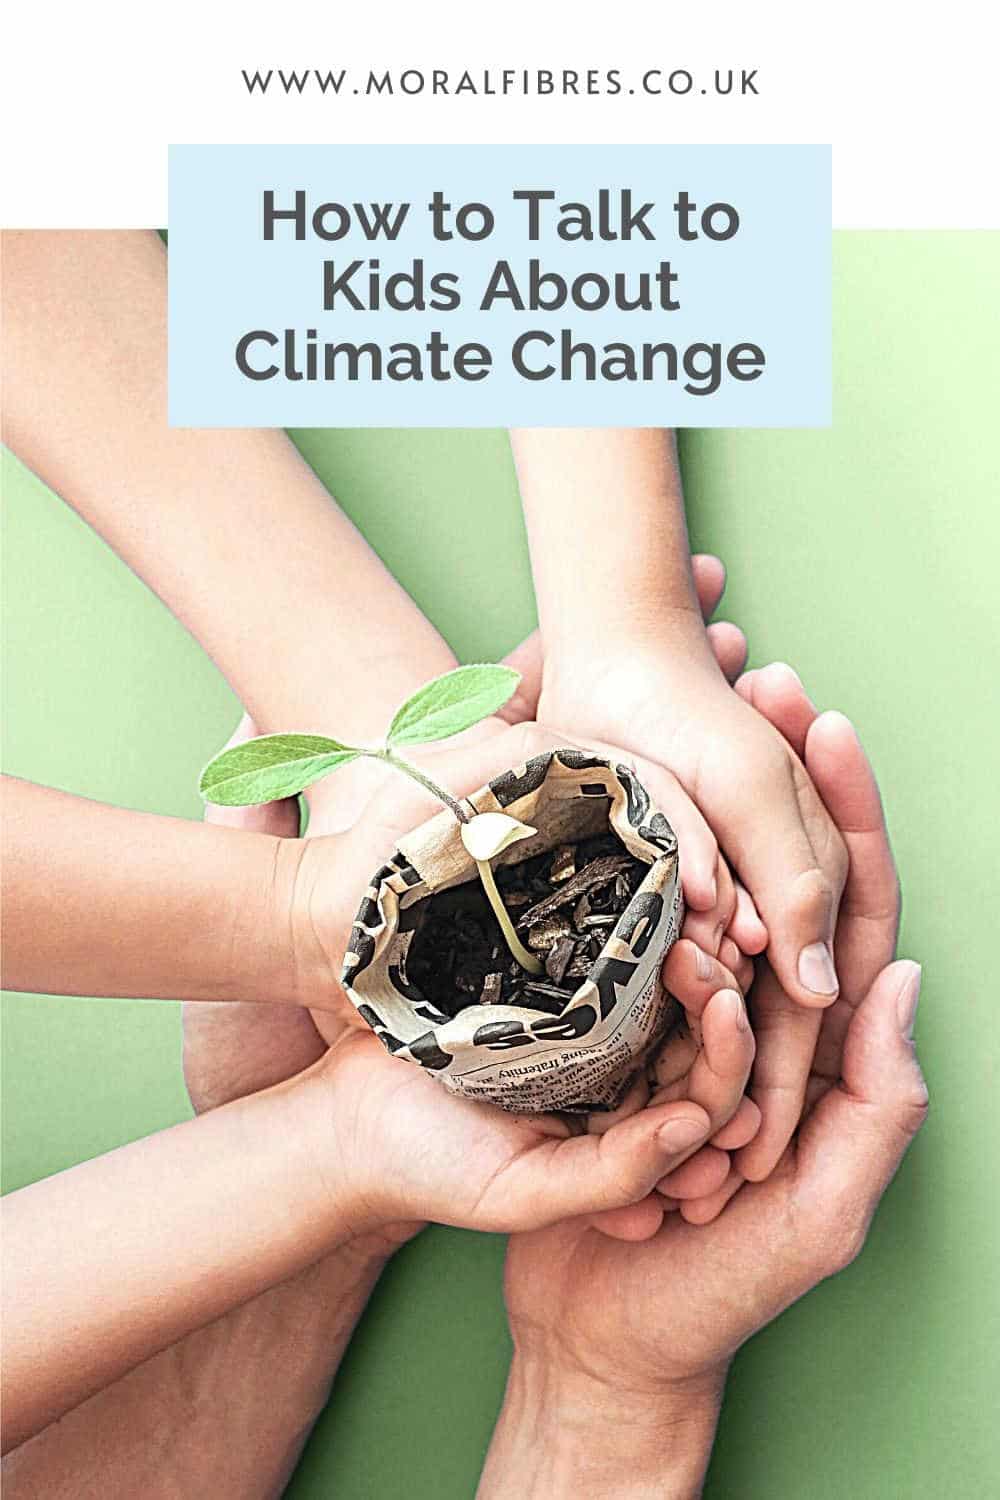 Many hands holding a seedling, on a green background, with a blue text box that reads how to talk to kids about climate change